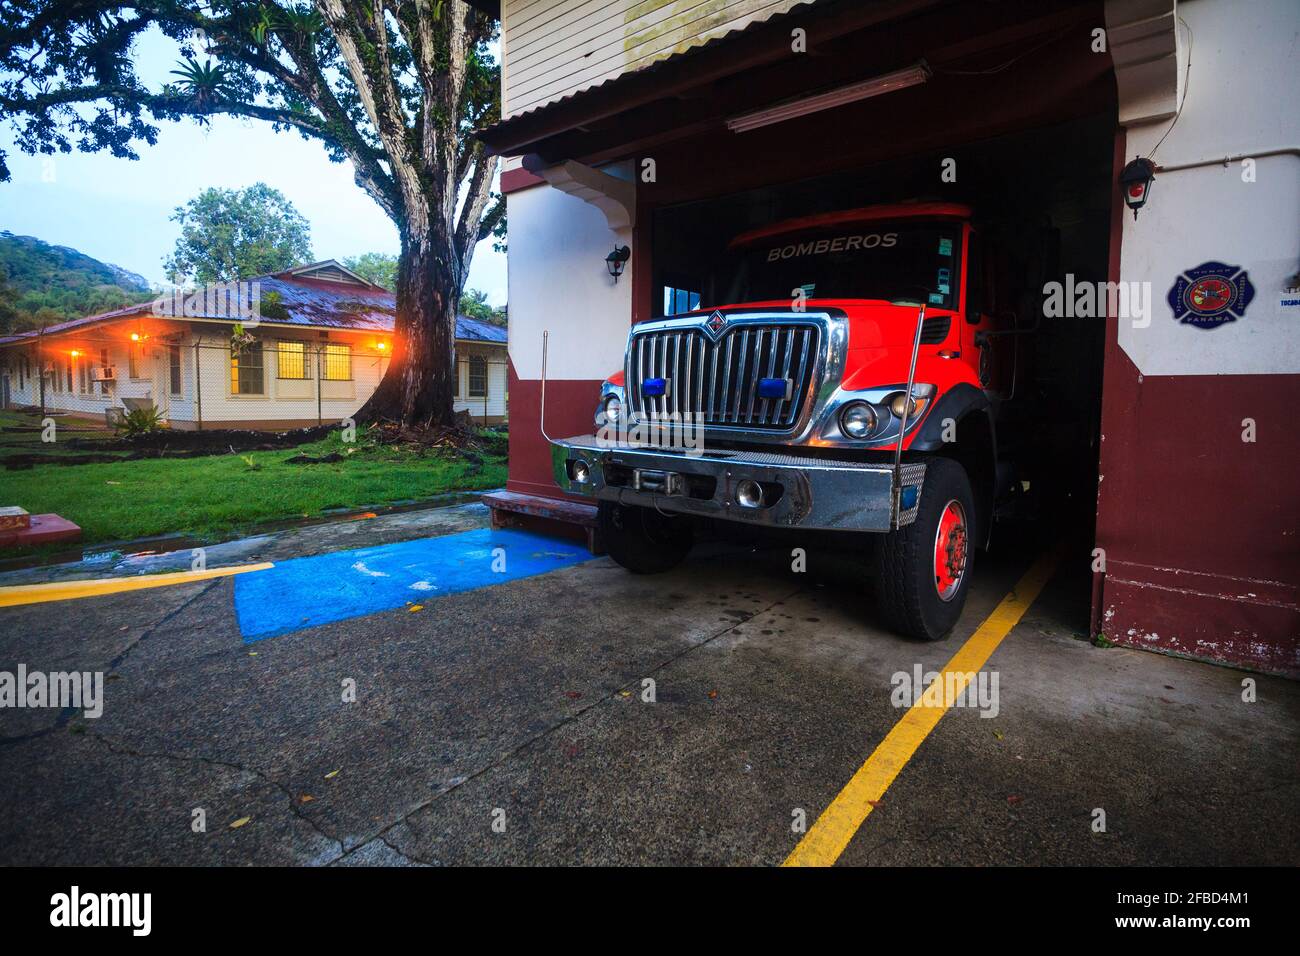 Evening at the fire fighter station in the town of Gamboa, Colon province, Republic of Panama, Central America. Stock Photo